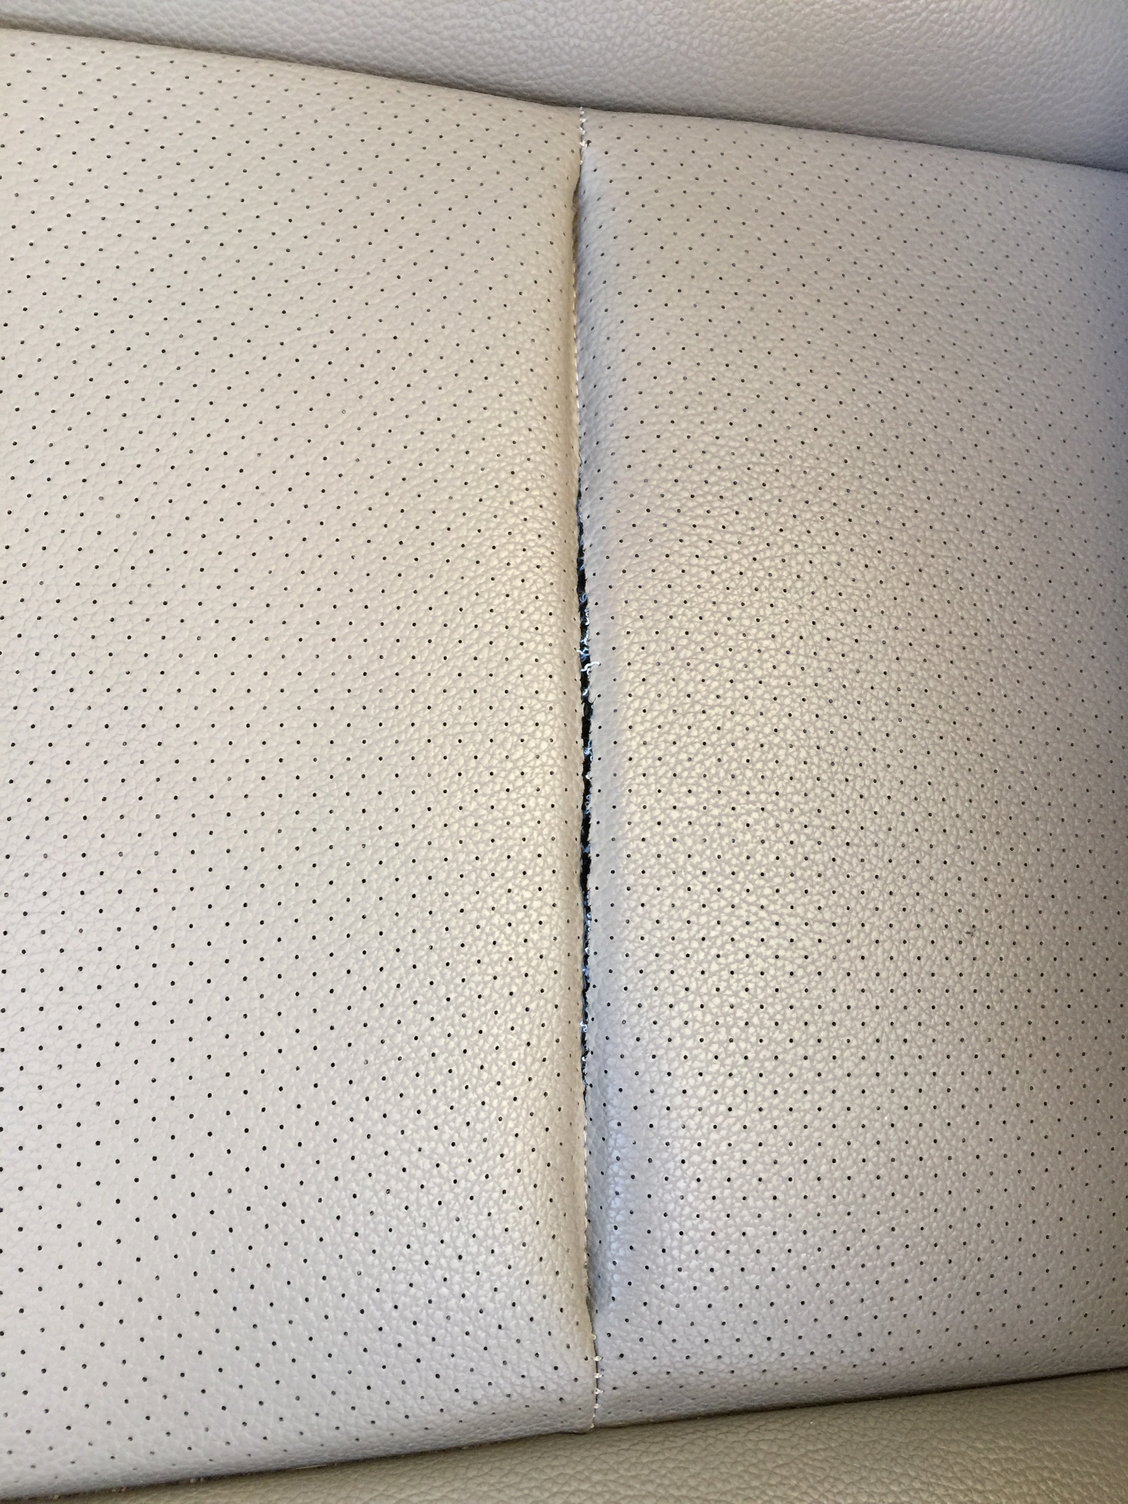 how to repair ripped car seat. It's a pretty big tear and it's perforated  leather (i think). Not sure what to do as I definitely don't have $100+ to  throw away on